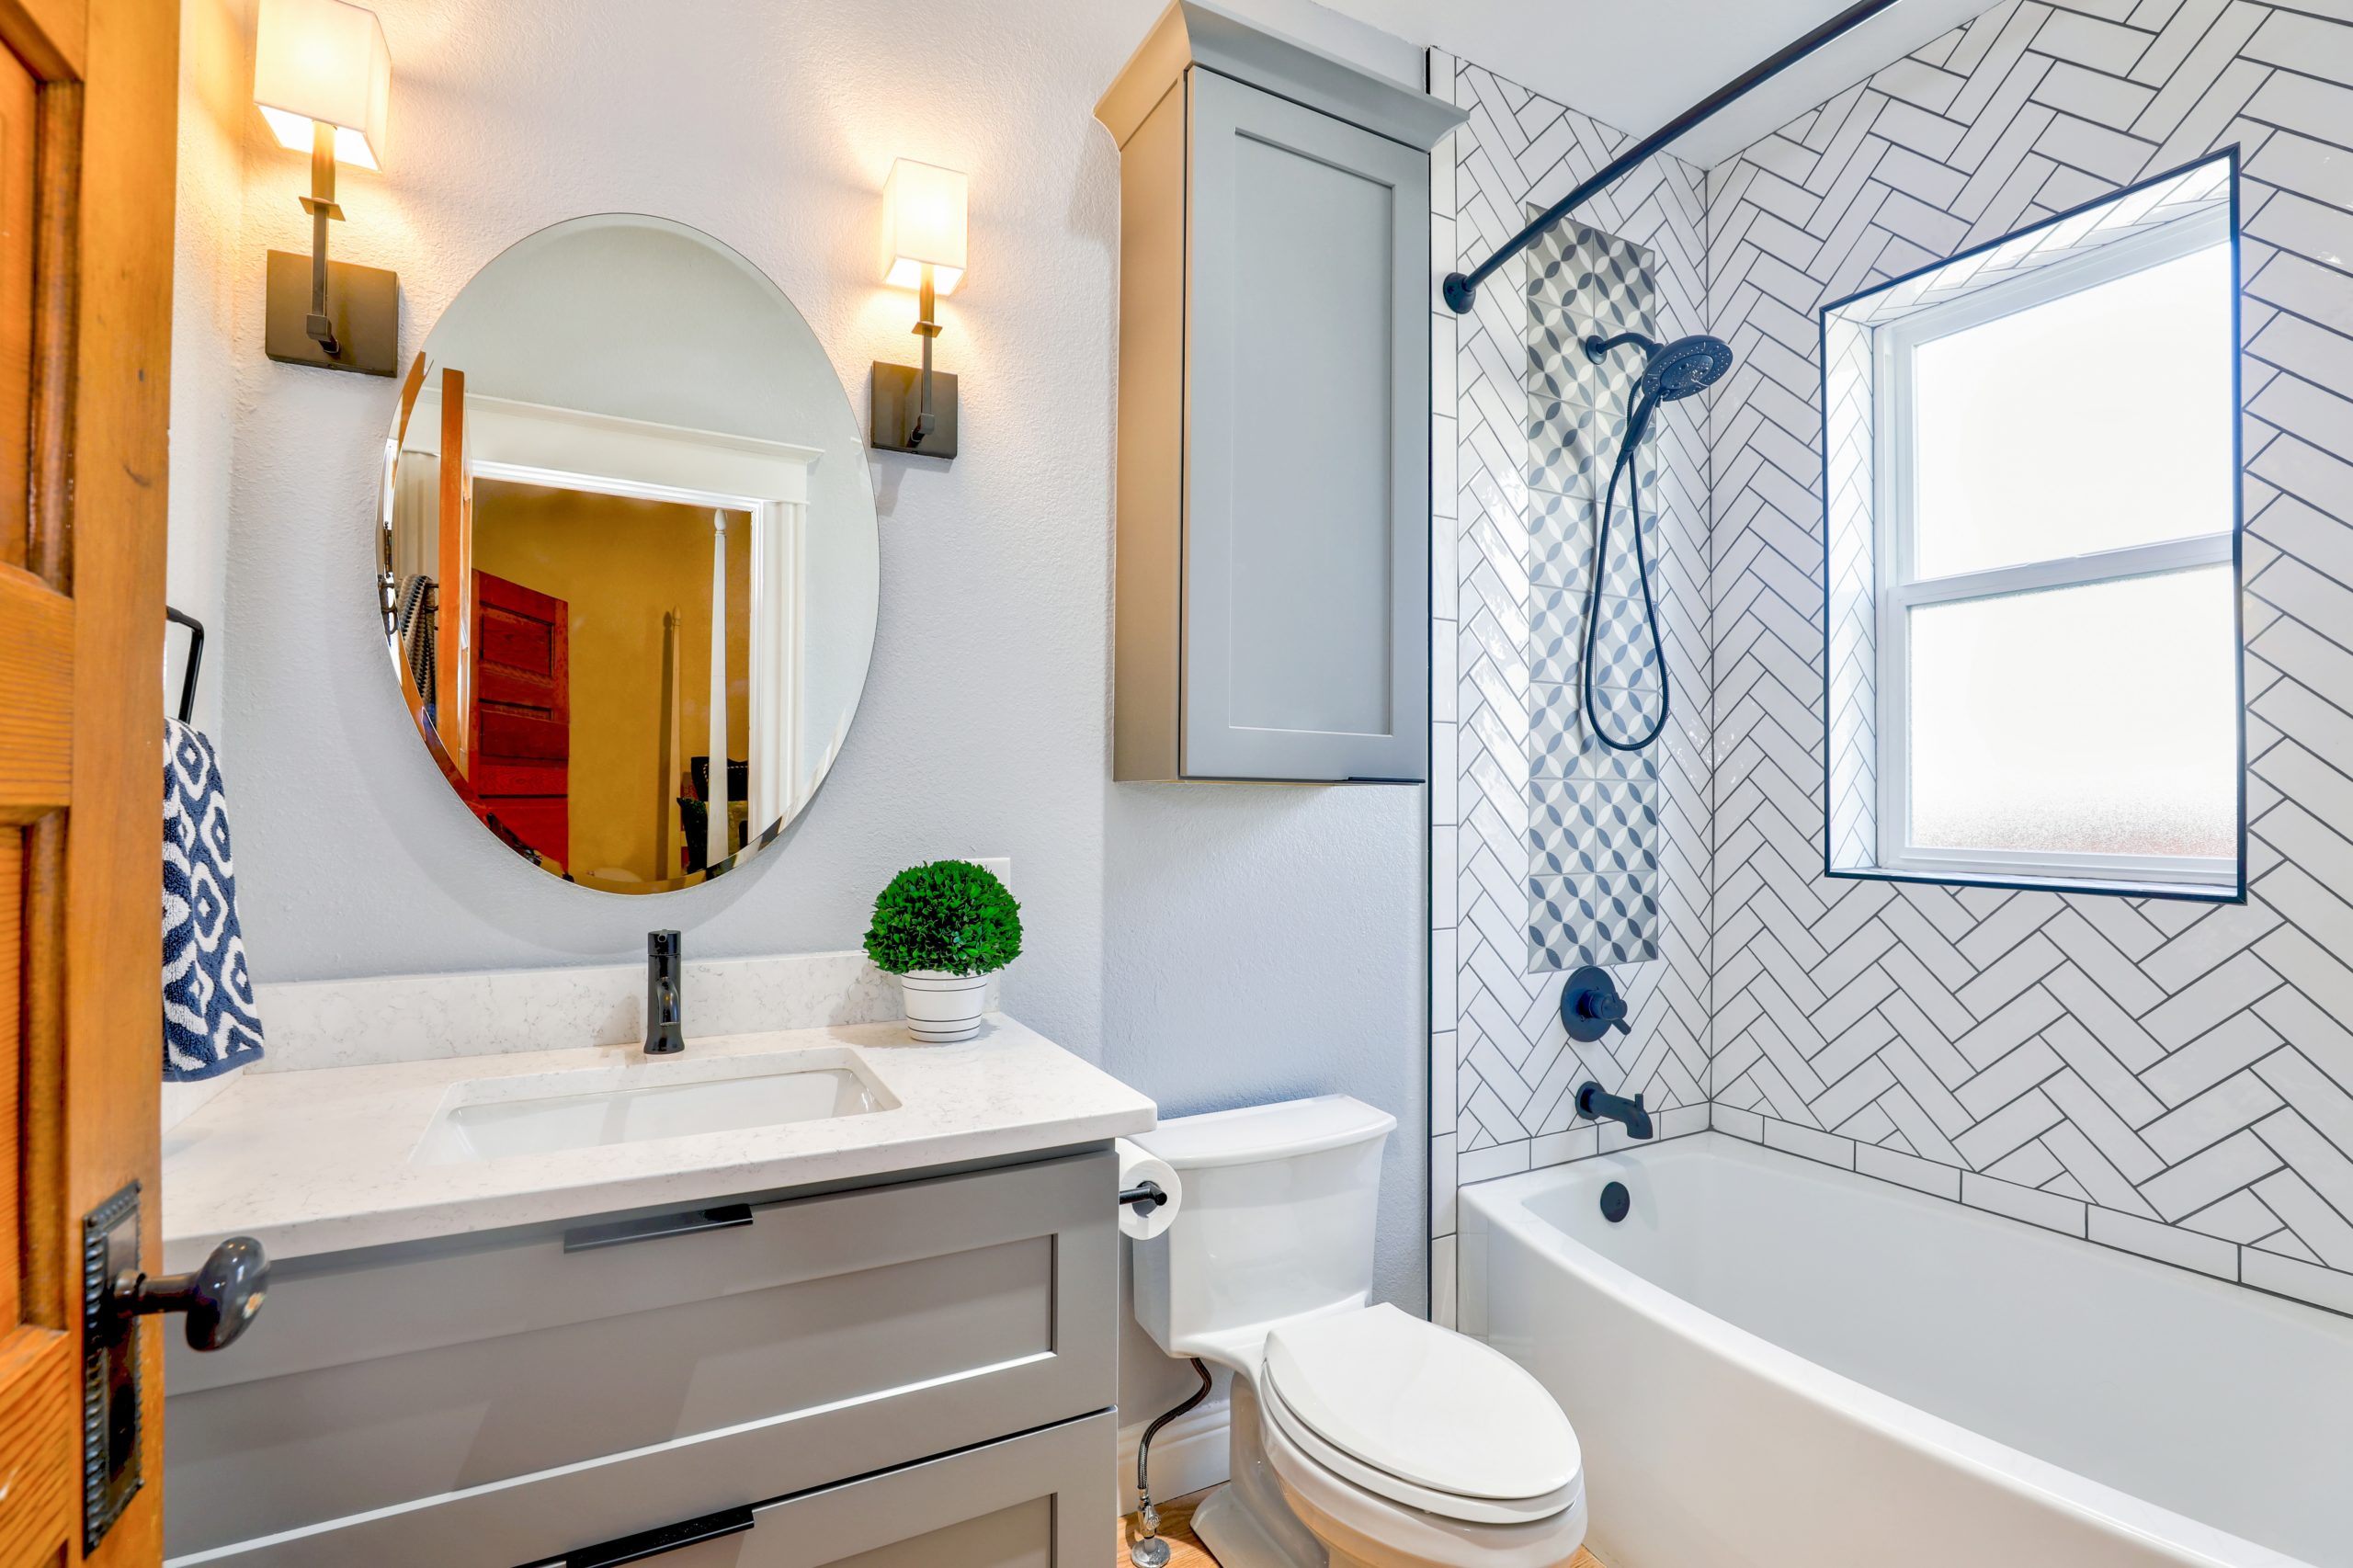 Top 5 Questions to Ask for a Bathroom Remodel | BMR Homes